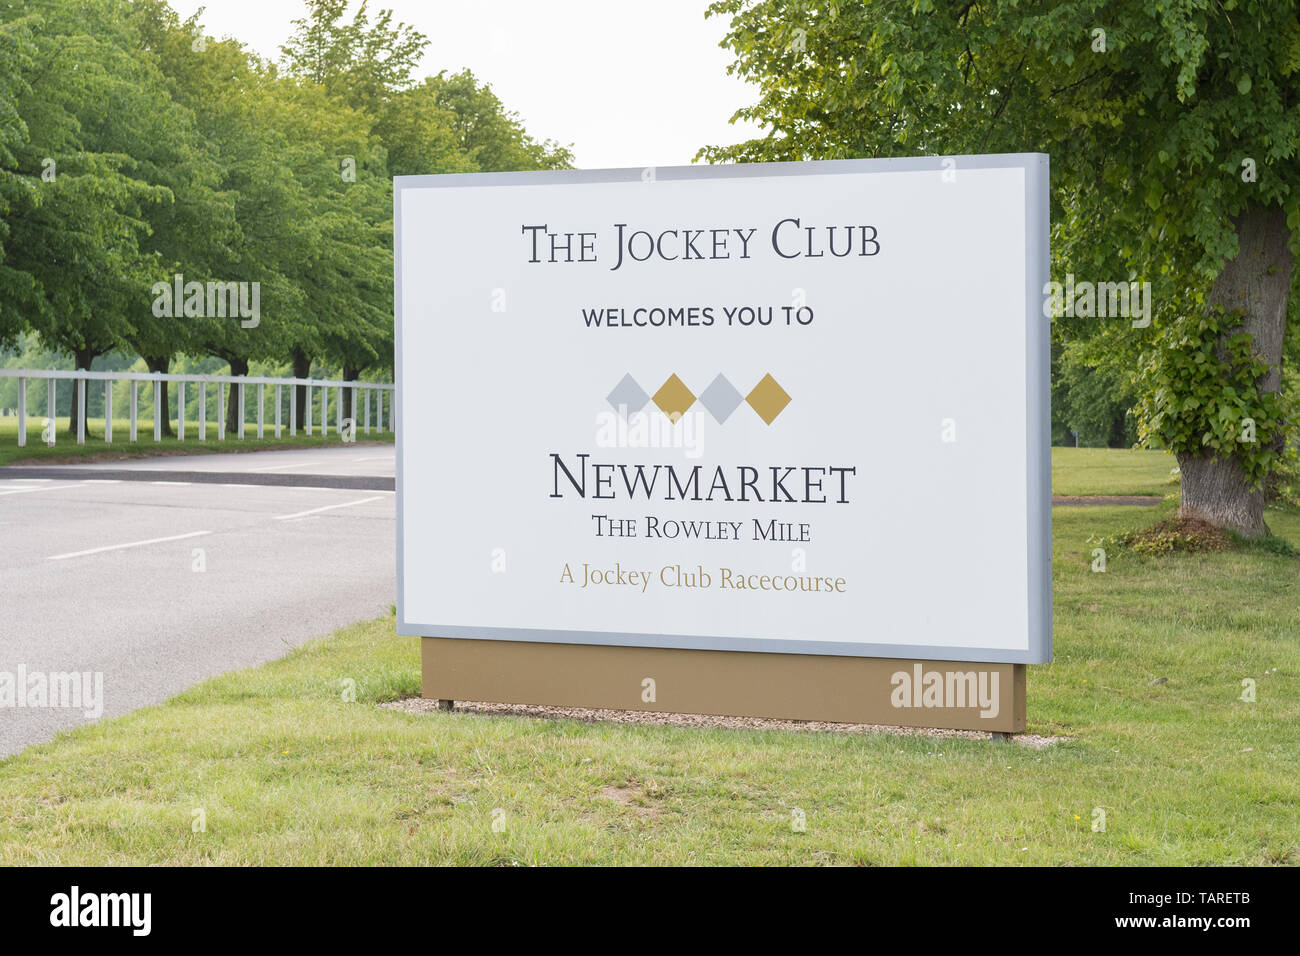 The Jockey Club, Newmarket The Rowley Mile sign, Newmarket, England, UK Stock Photo